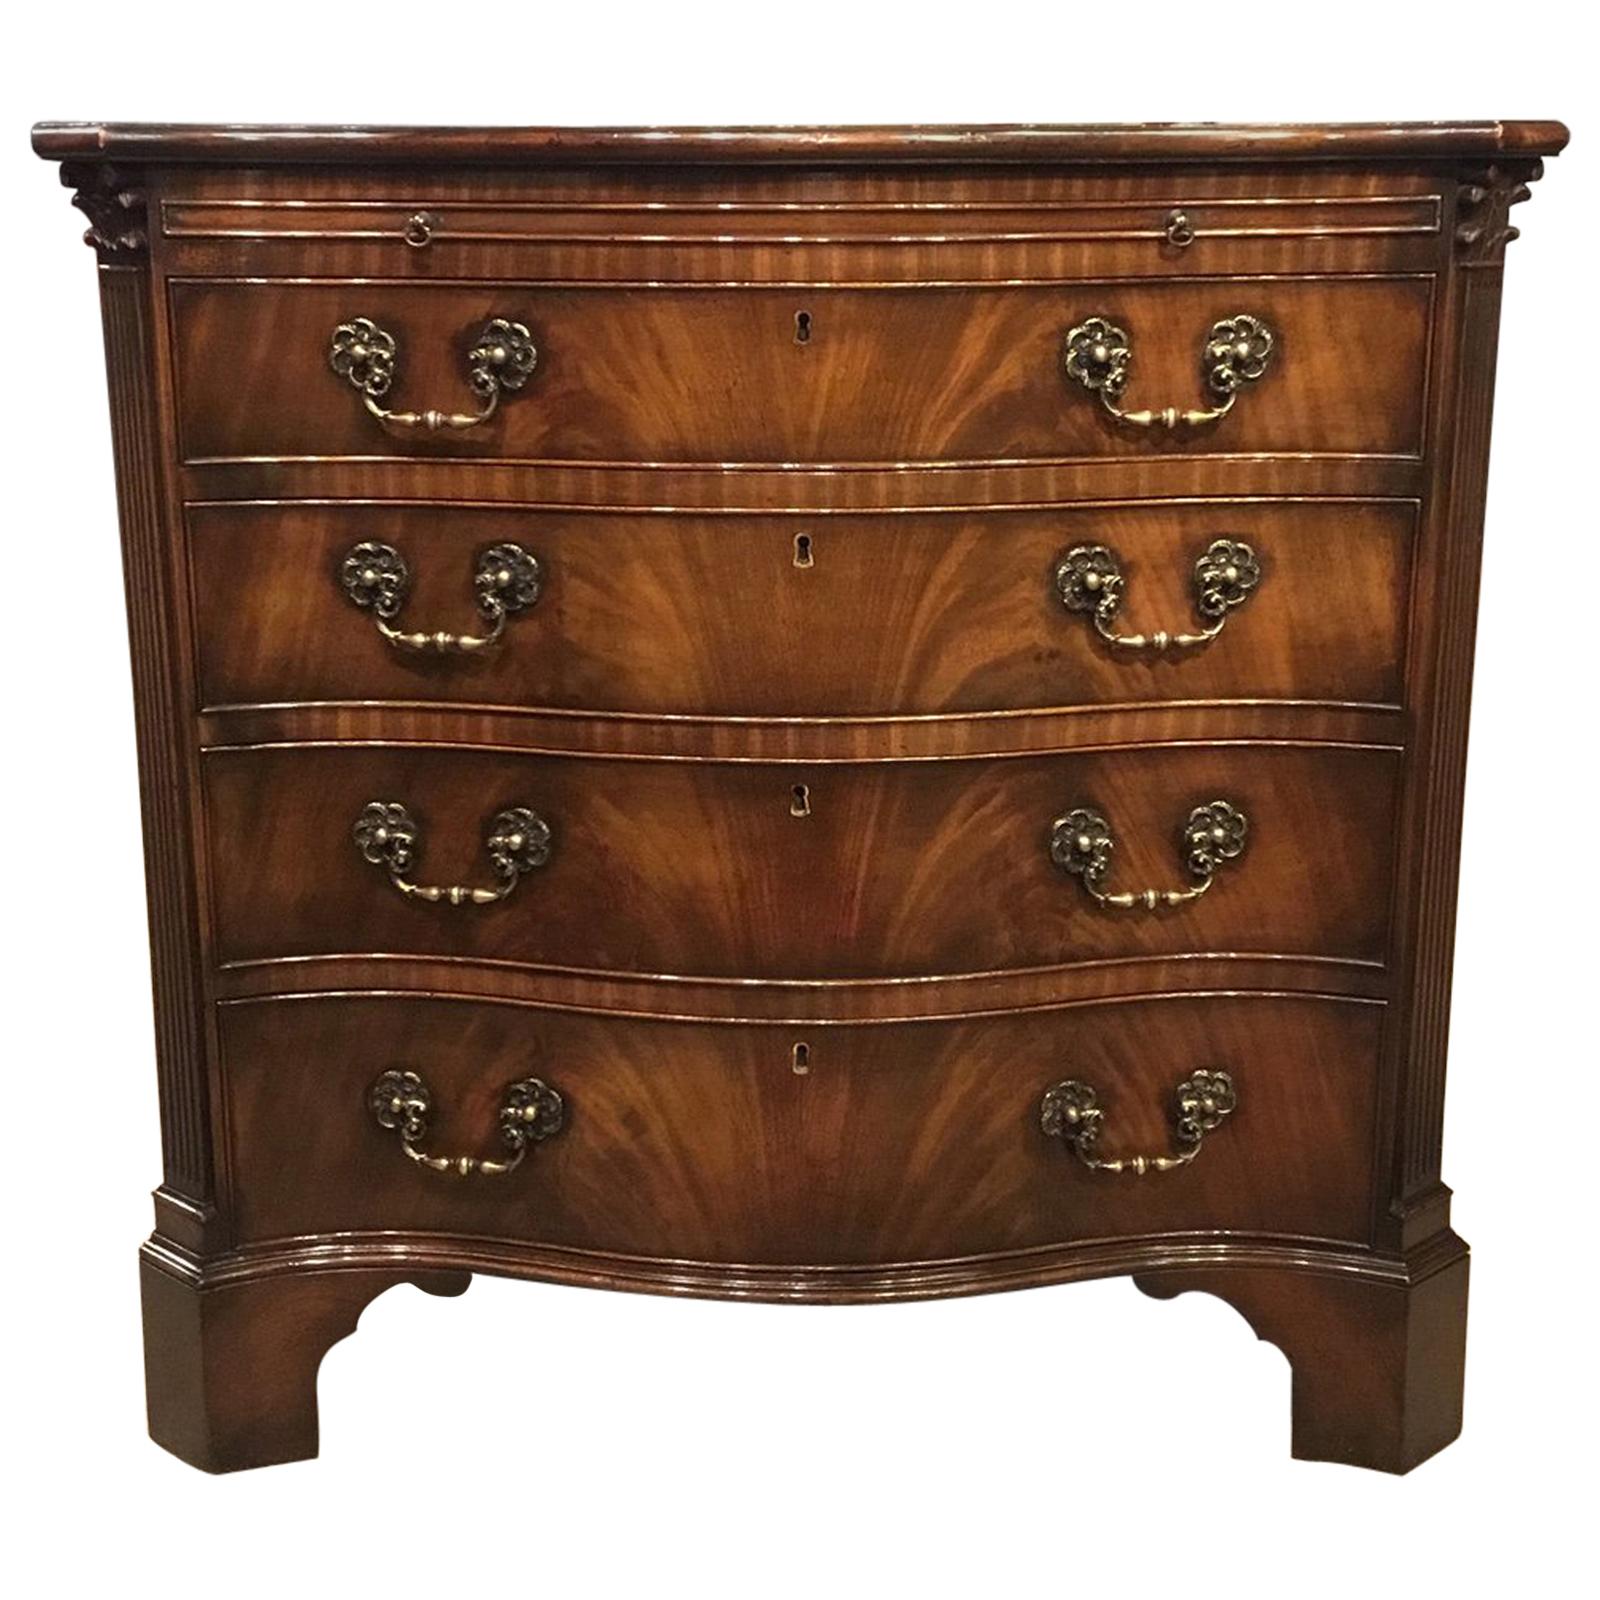 Chippendale Revival Flame Mahogany Serpentine Bachelors Chest